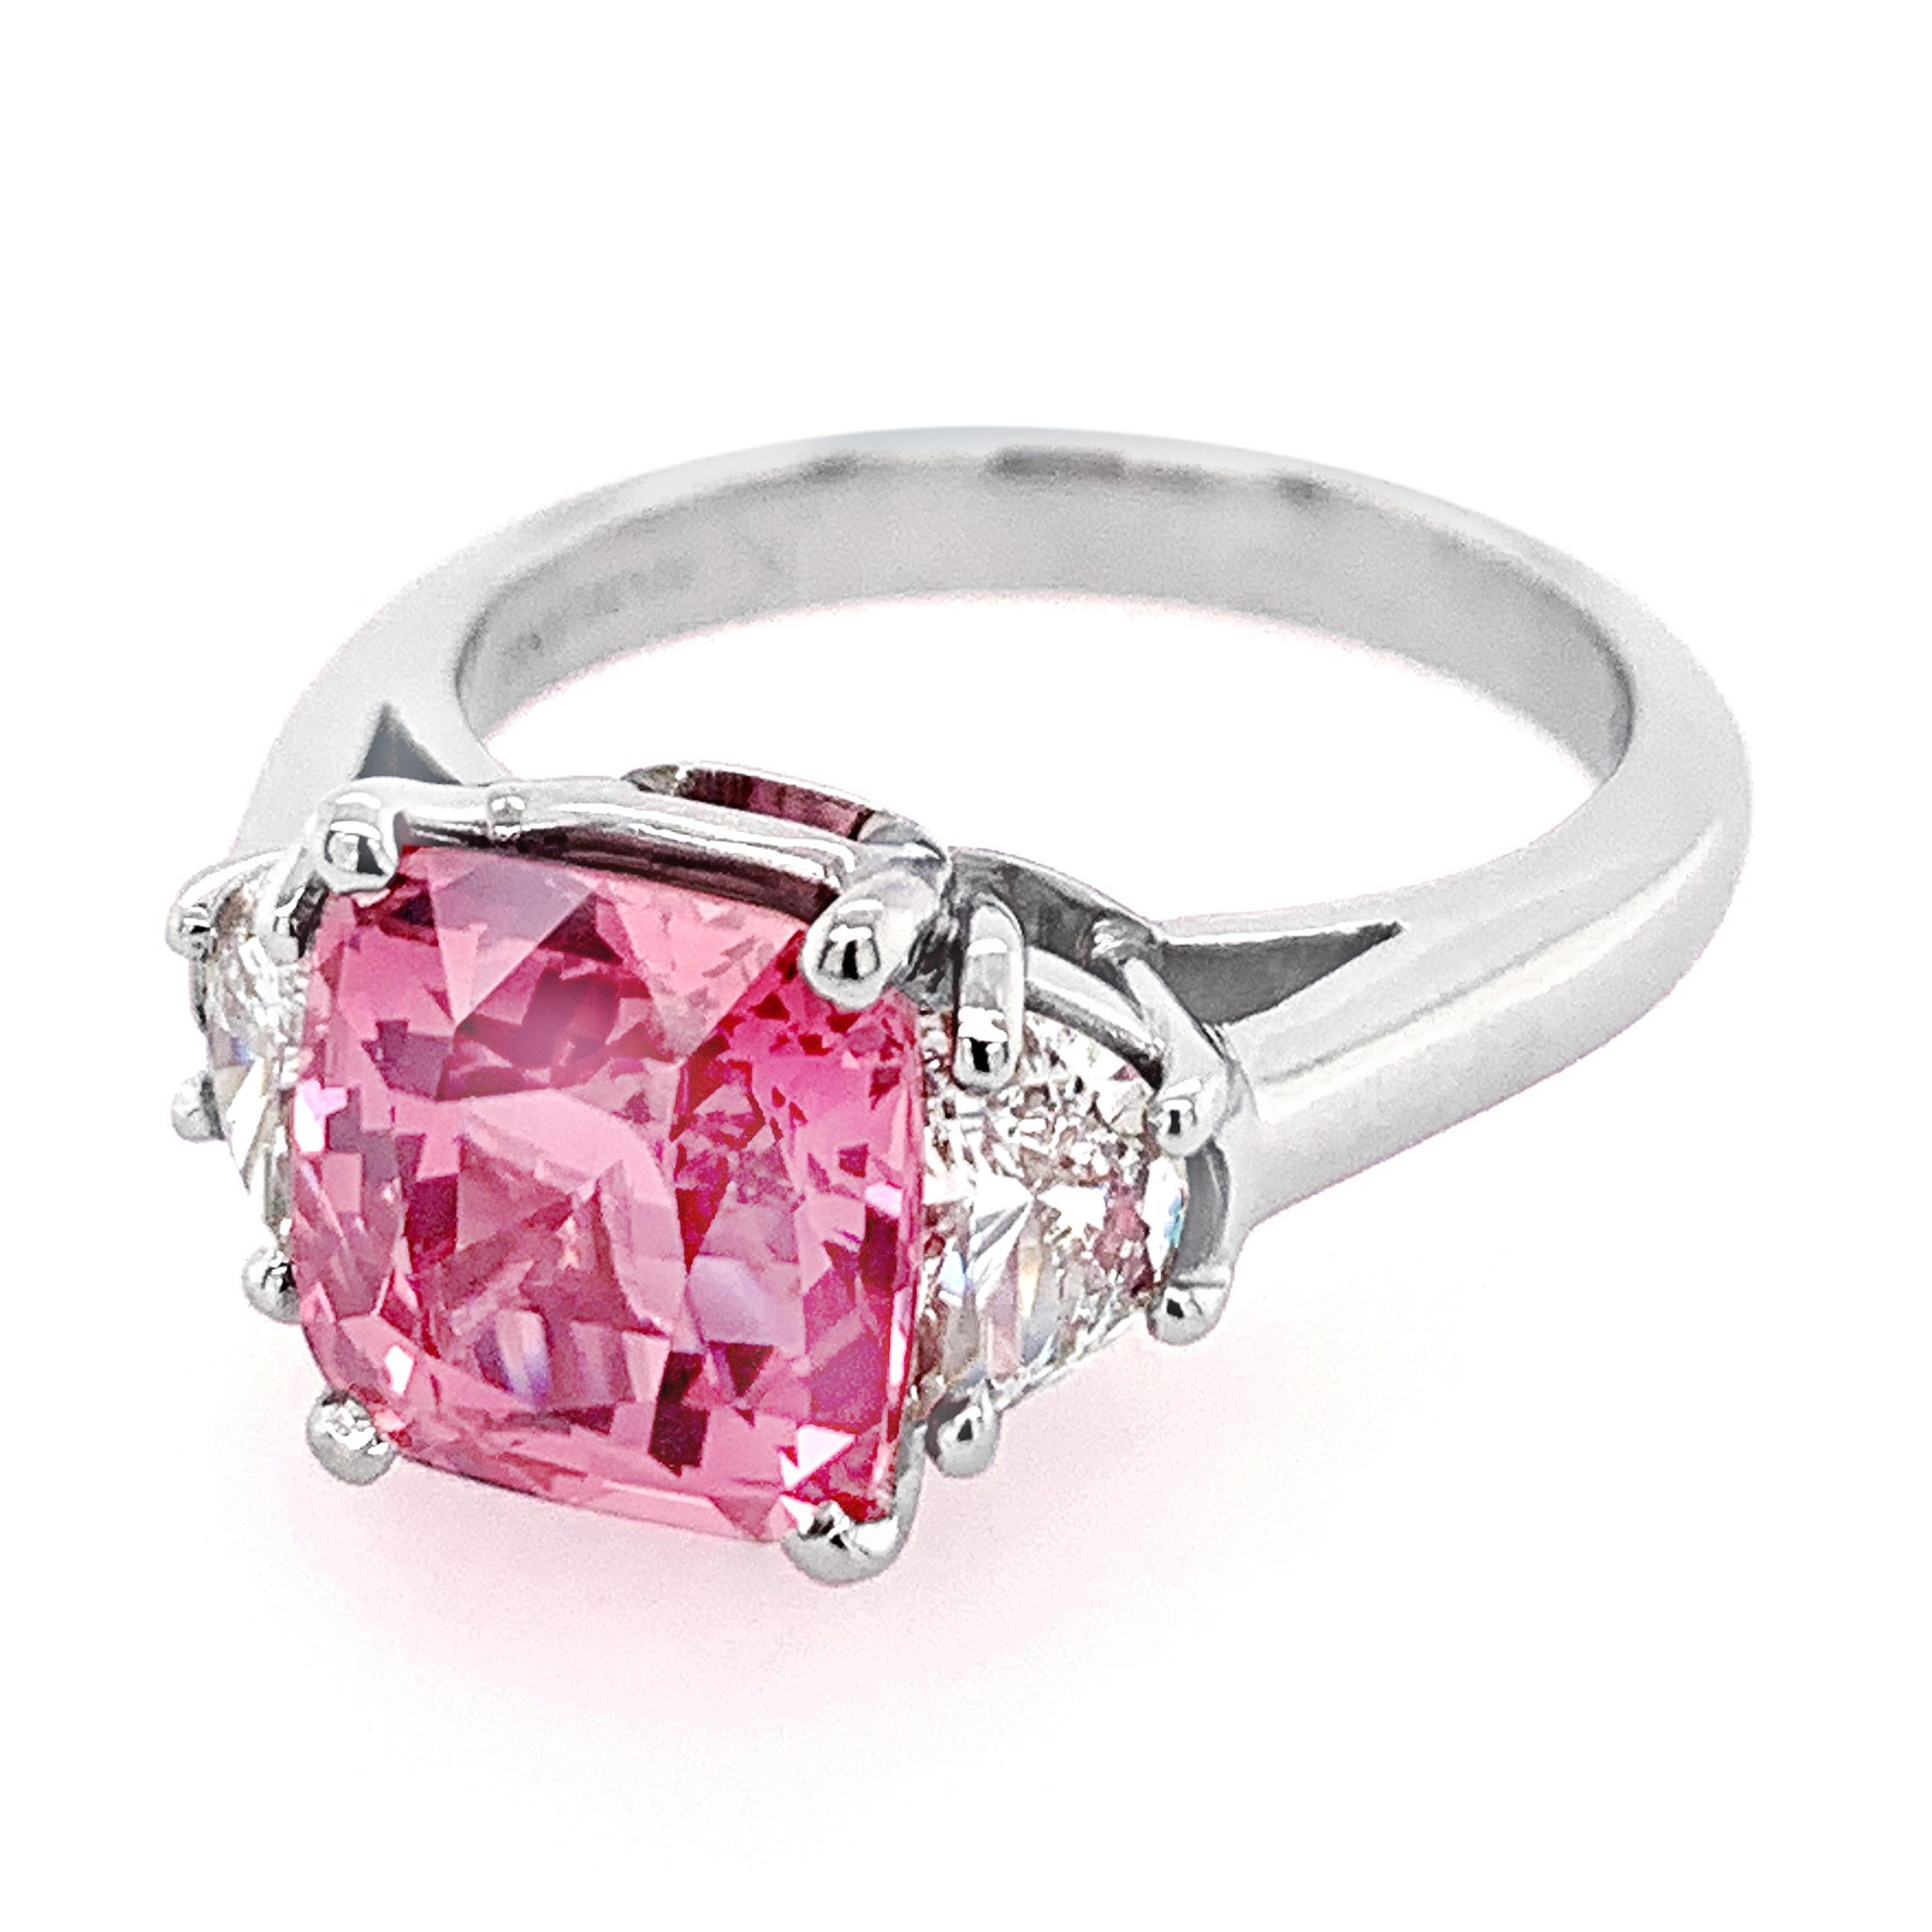 GIA Certified 3.95 Carat Natural (No Heat) Pink Sapphire Ring. Center sapphire is cushion cut. Two side half-moon-shaped diamonds totaling 0.64 carat; clarity VVS2-VS1, color H-I. Ring and mounting in Platinum.

